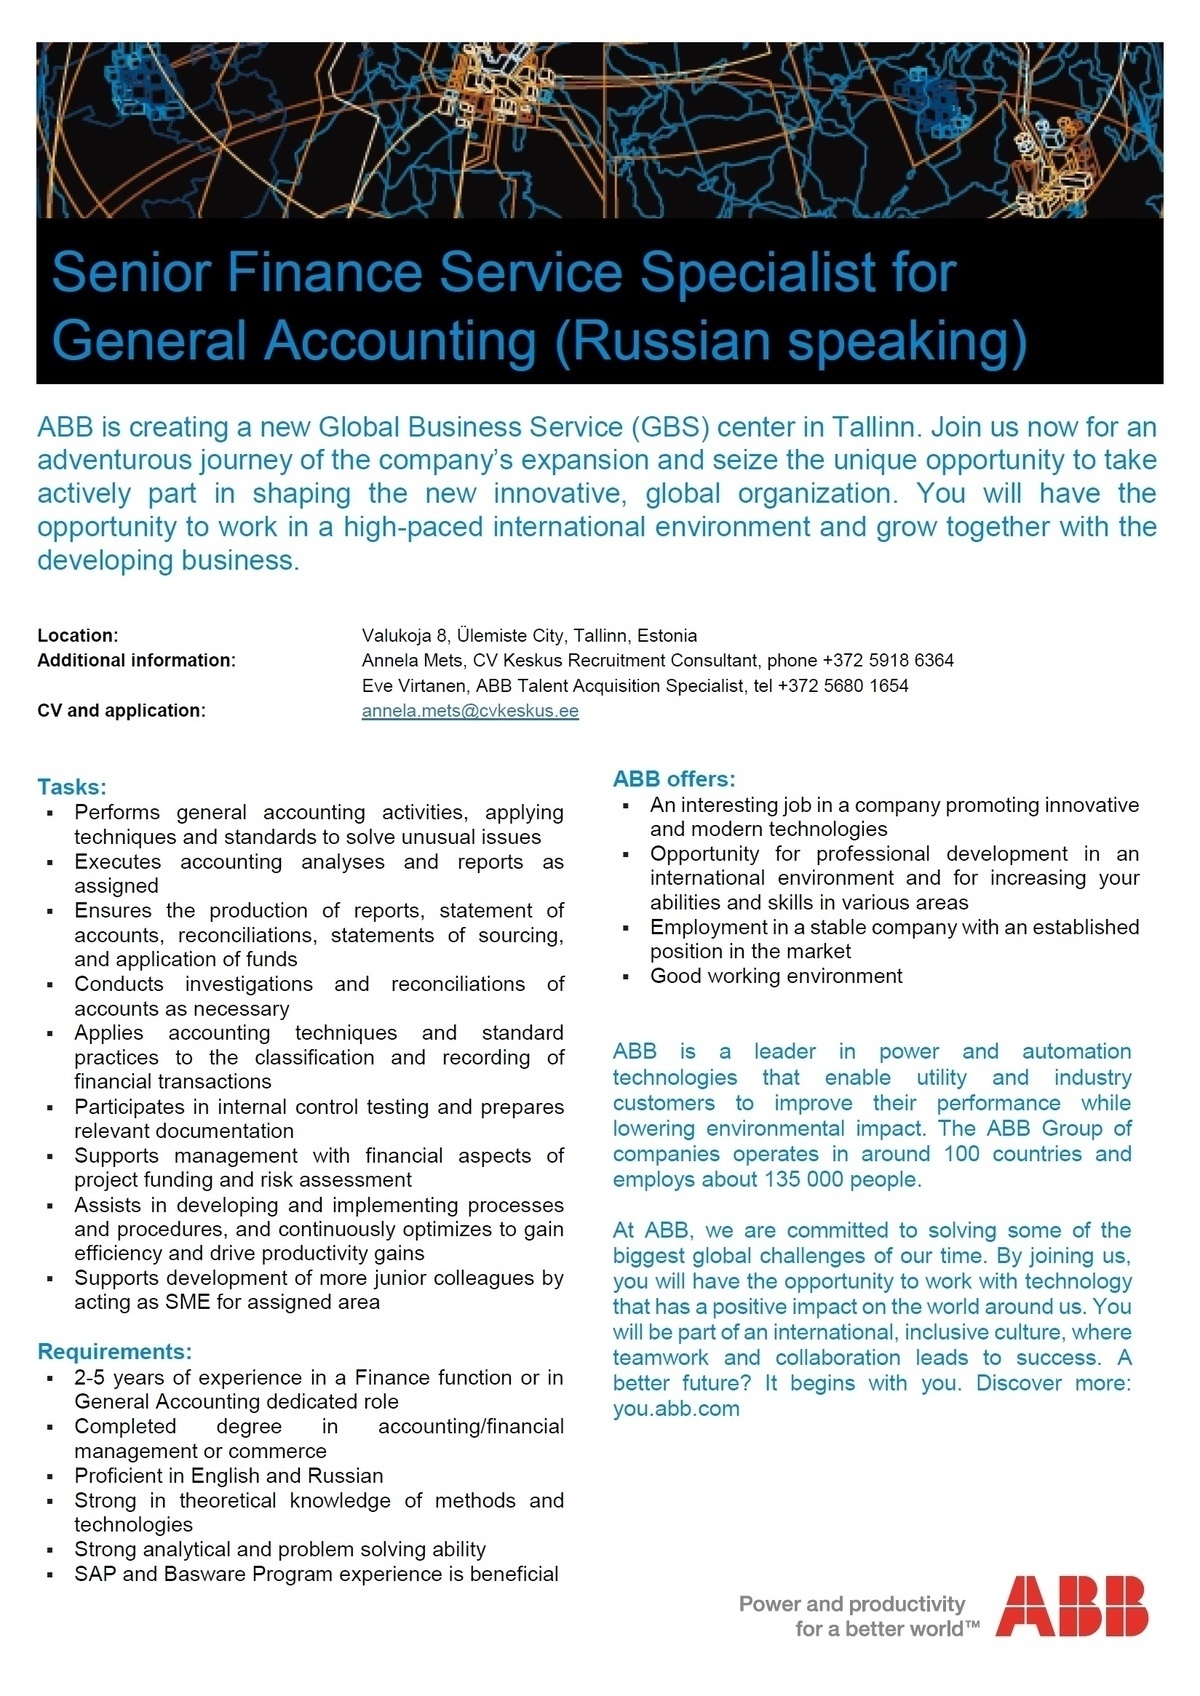 CV KESKUS OÜ ABB is looking for a Senior Finance Service Specialist for General Accounting 